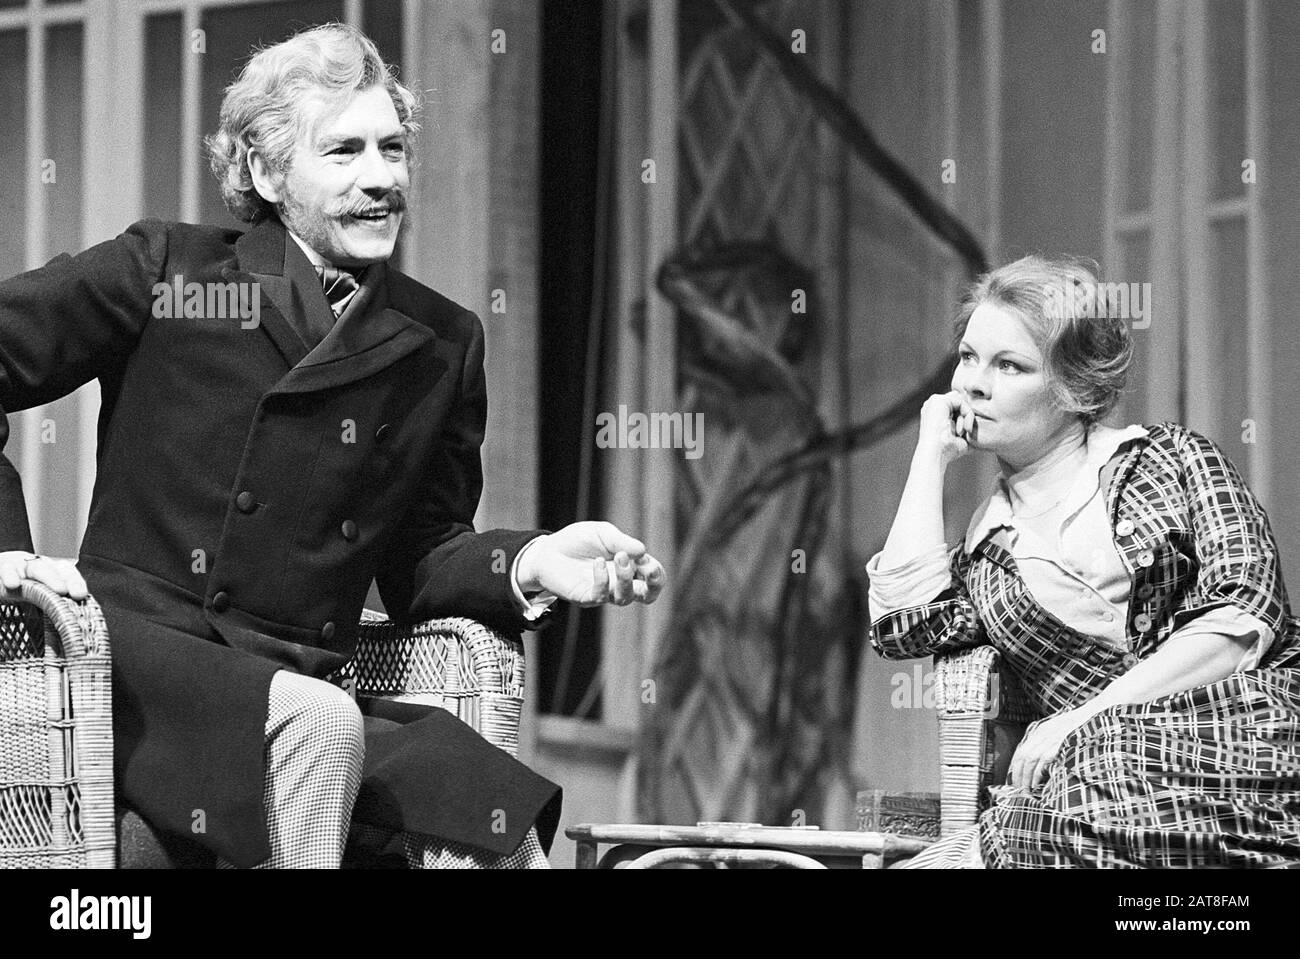 Ian McKellen (Karsten Bernick), Judi Dench (Lona Hessel) in PILLARS OF THE COMMUNITY by Henrik Ibsen directed by John Barton for Royal Shakespeare Company (RSC) at the Aldwych Theatre, London in 1977. Sir Ian Murray McKellen, born 1939, Burnley, England. English stage and film actor. Co-founder of Stonewall, gay rights activist, knighted in 1990, made a Companion of Honour 2007. Dame Judith Olivia Dench CH DBE FRSA, born 1934. Married to the actor Michael Williams from 1971 until his death in 2001. They had one daughter, the actress Finty Williams, born in 1972. Stock Photo